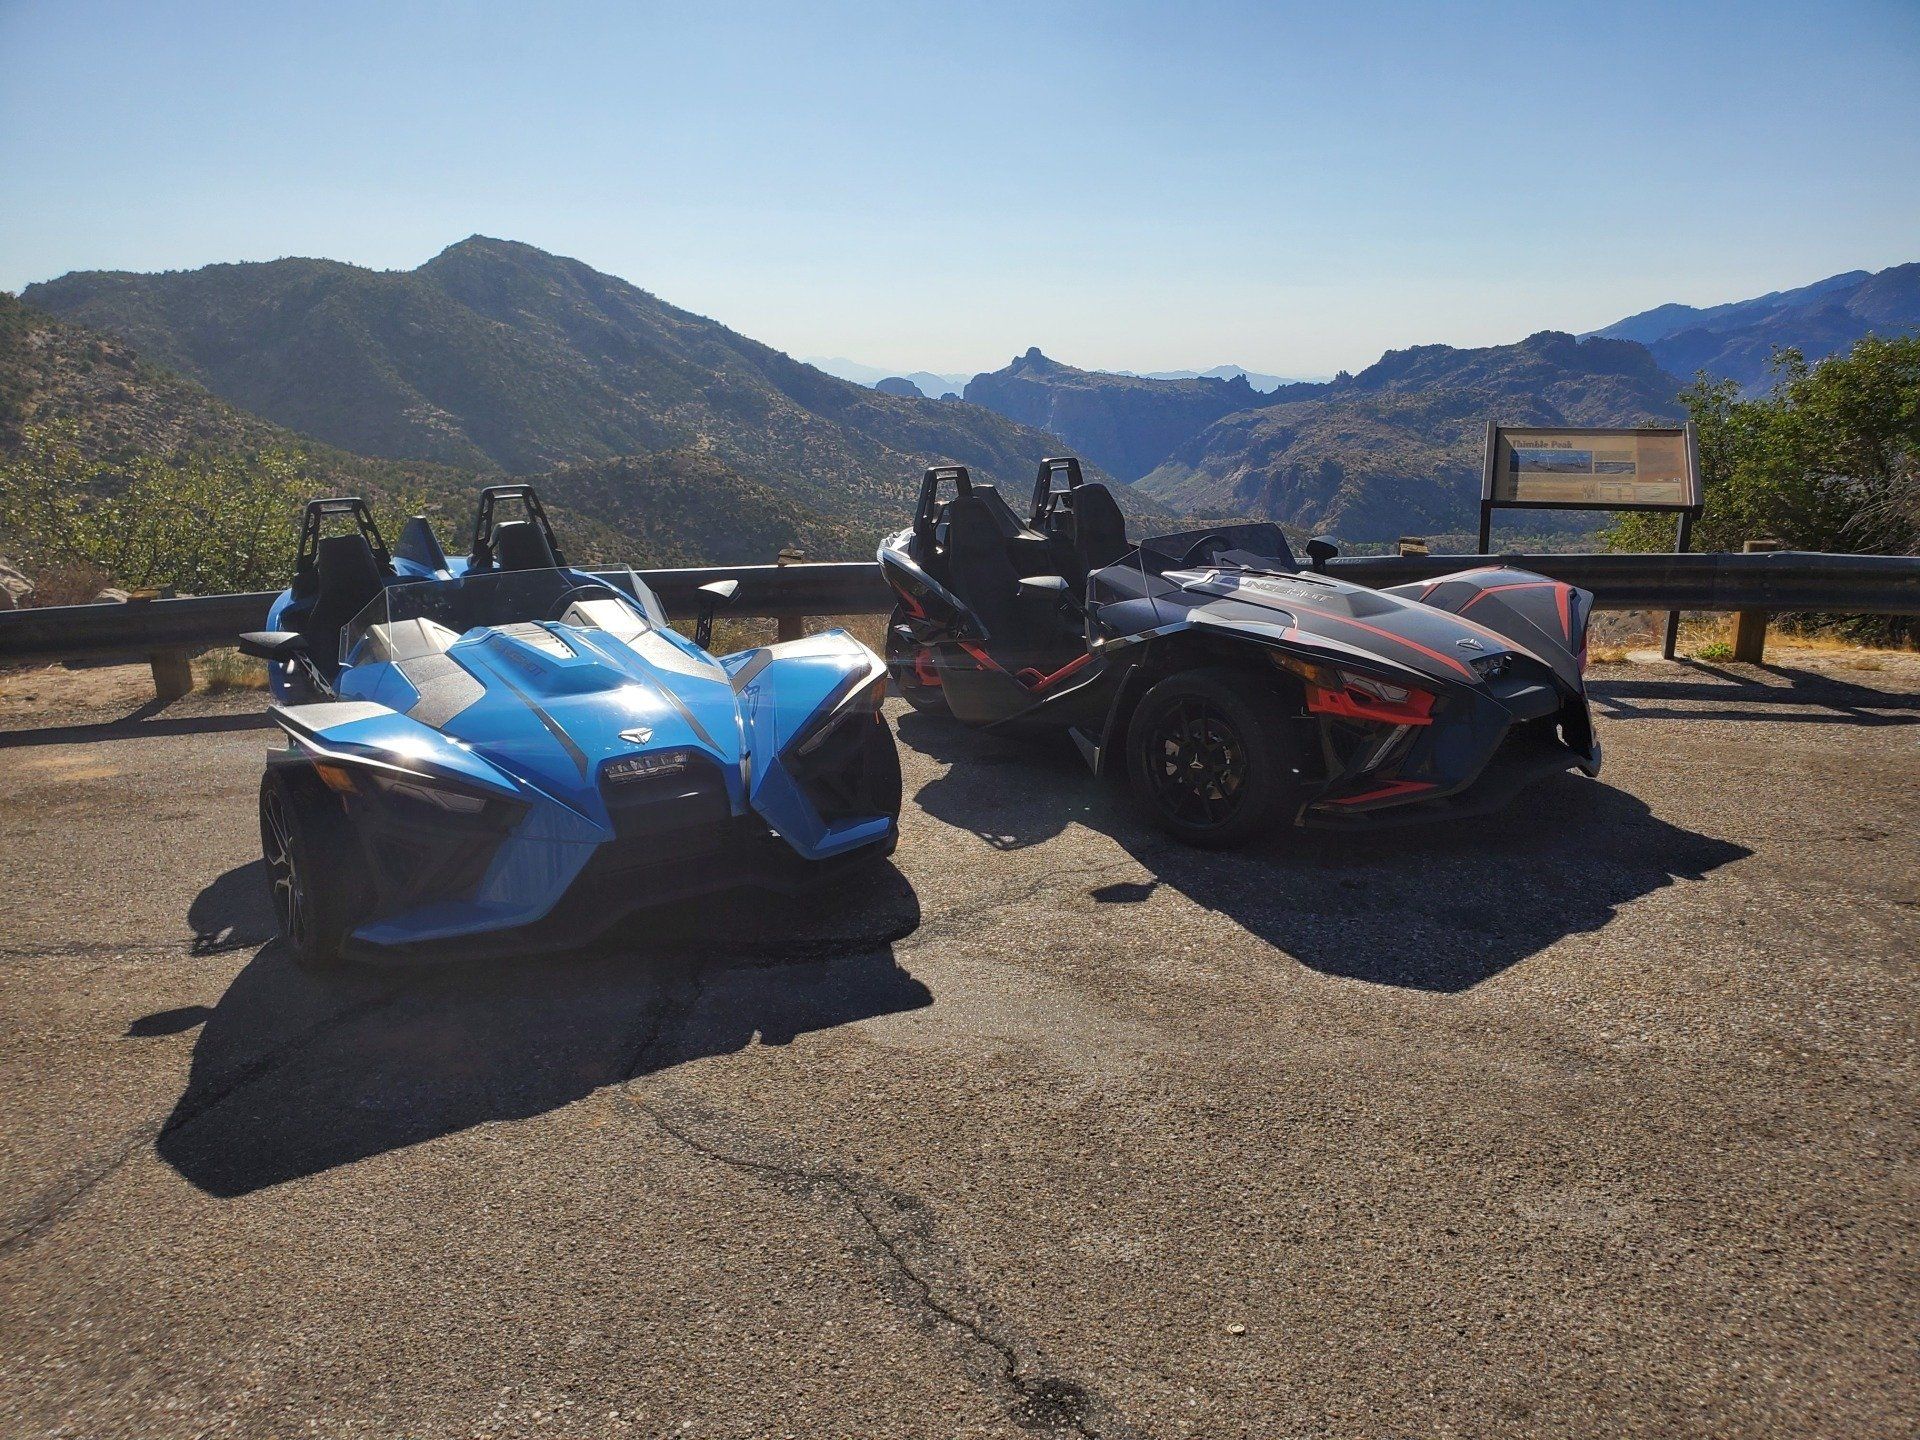 2 Polaris Slingshots parked at scenic view point in Tucson AZ